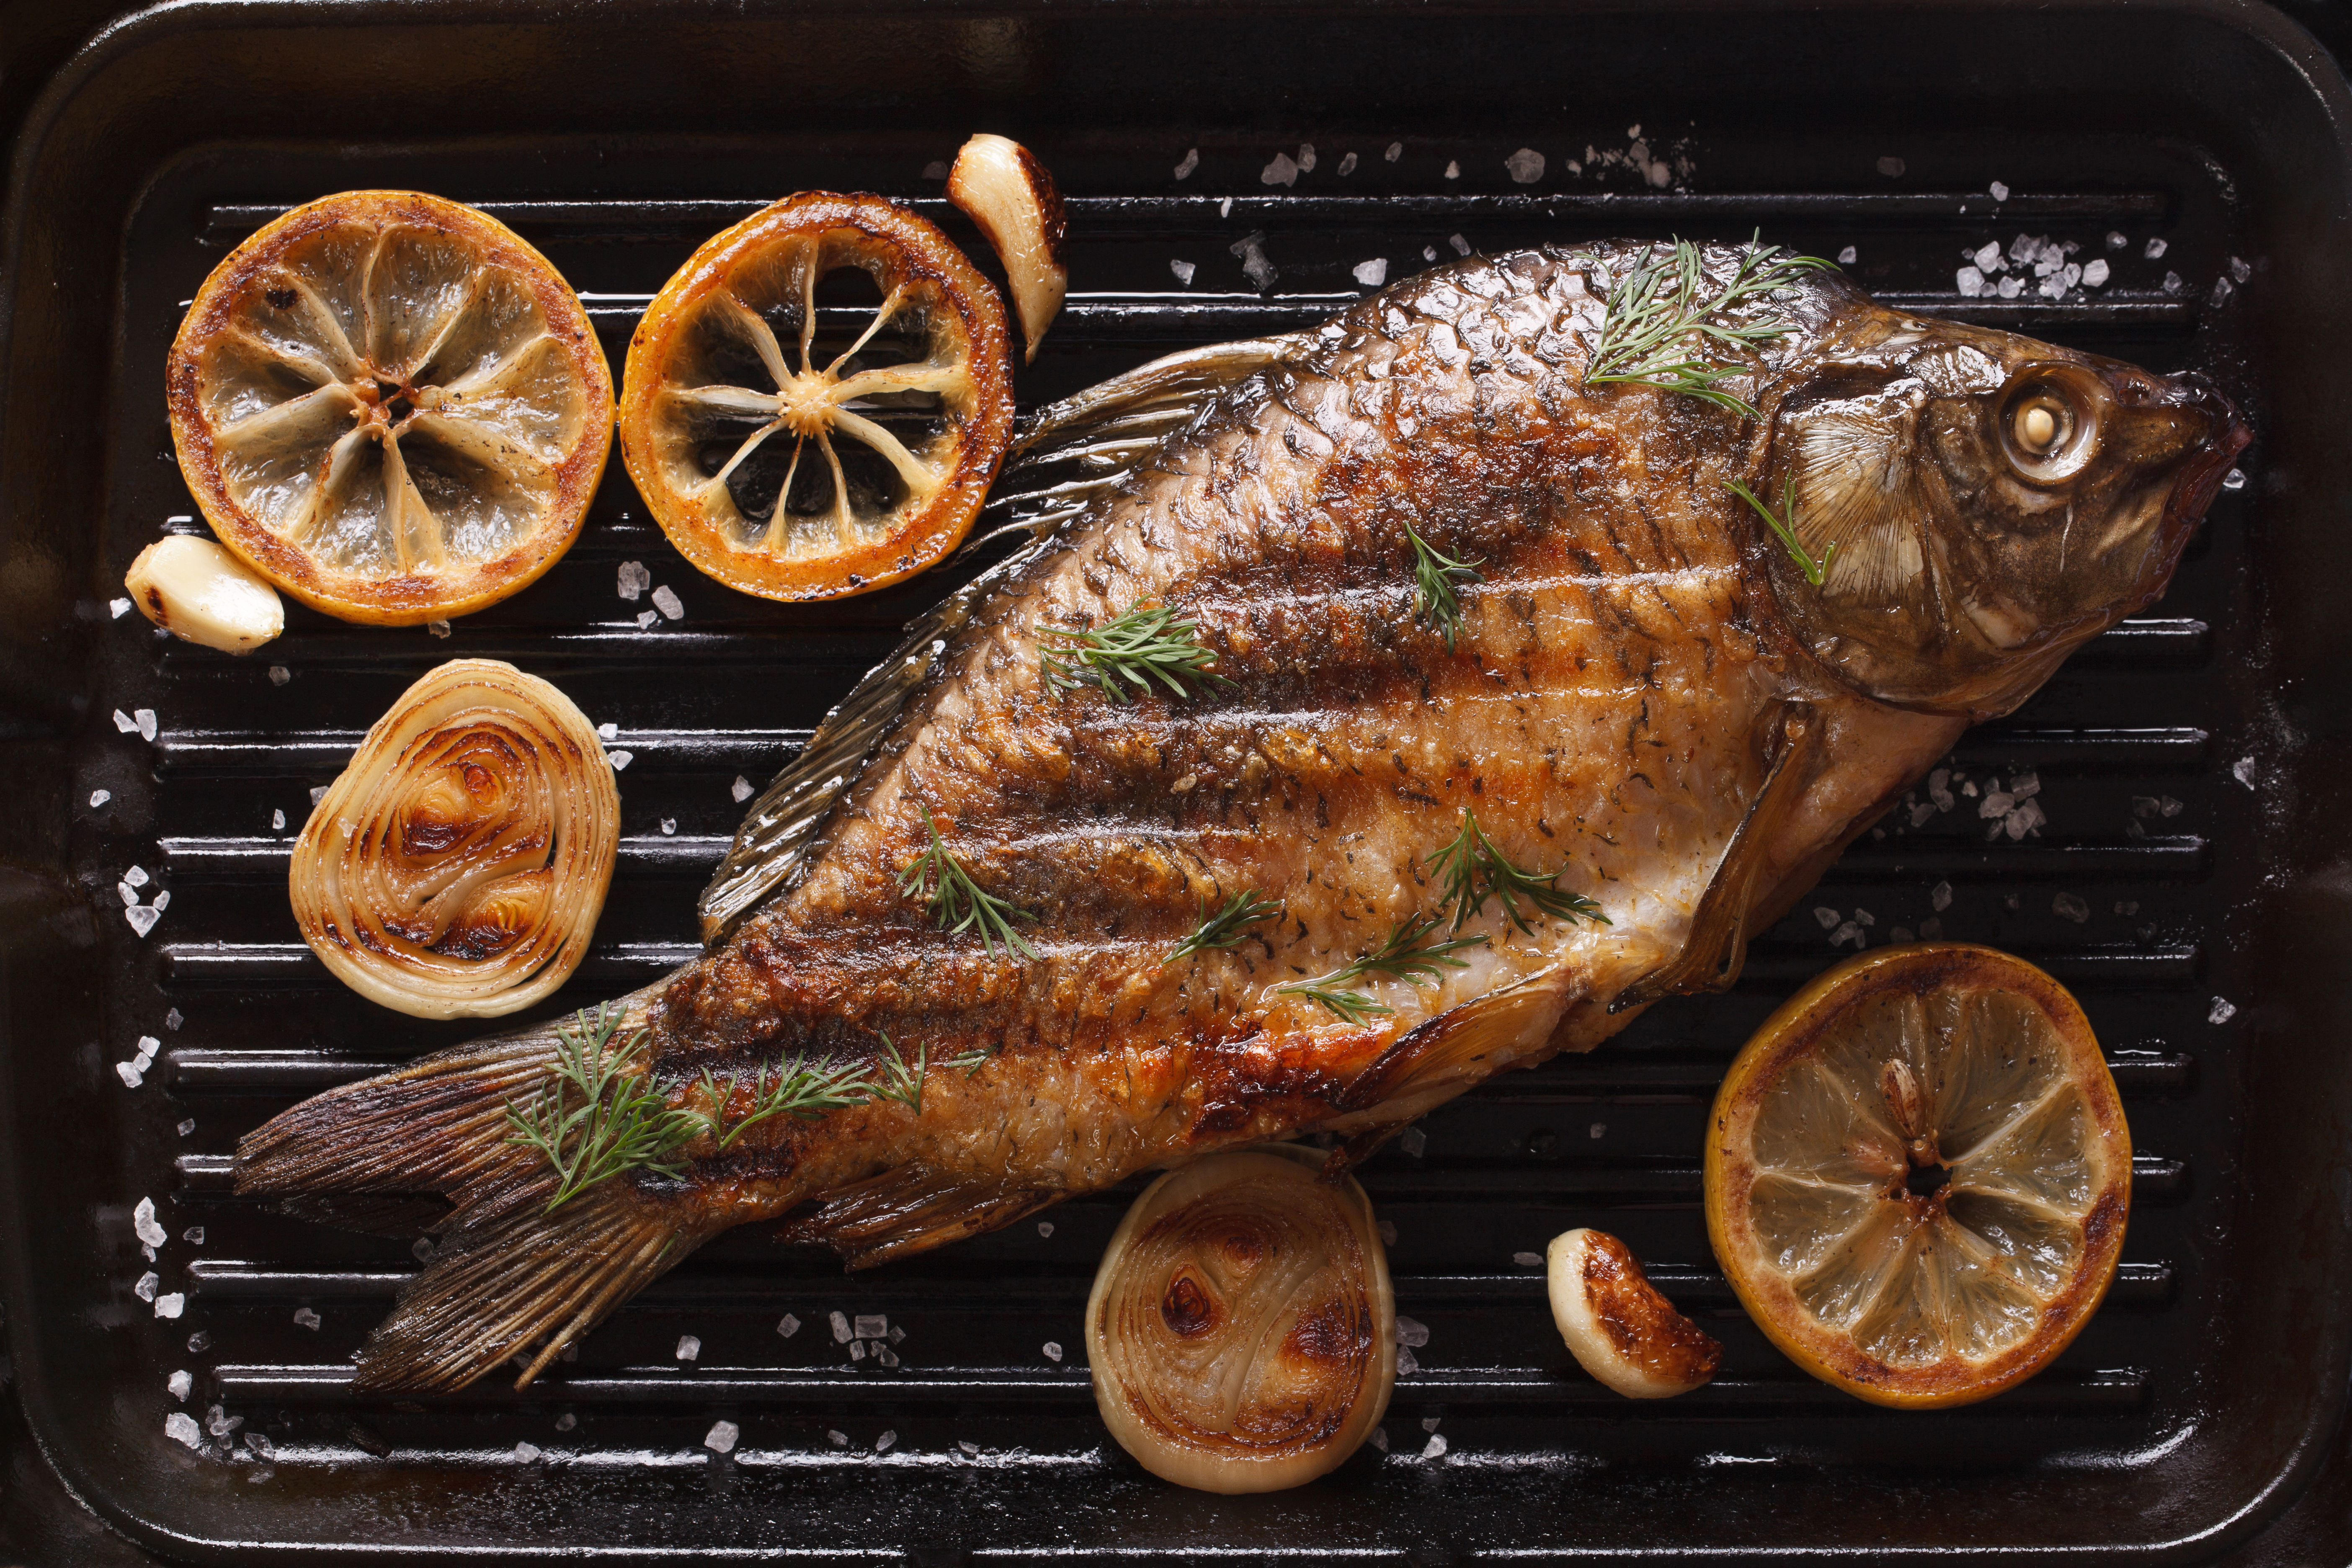 An Easy to Follow Step by Step Procedure of How to Grill a Whole Fish